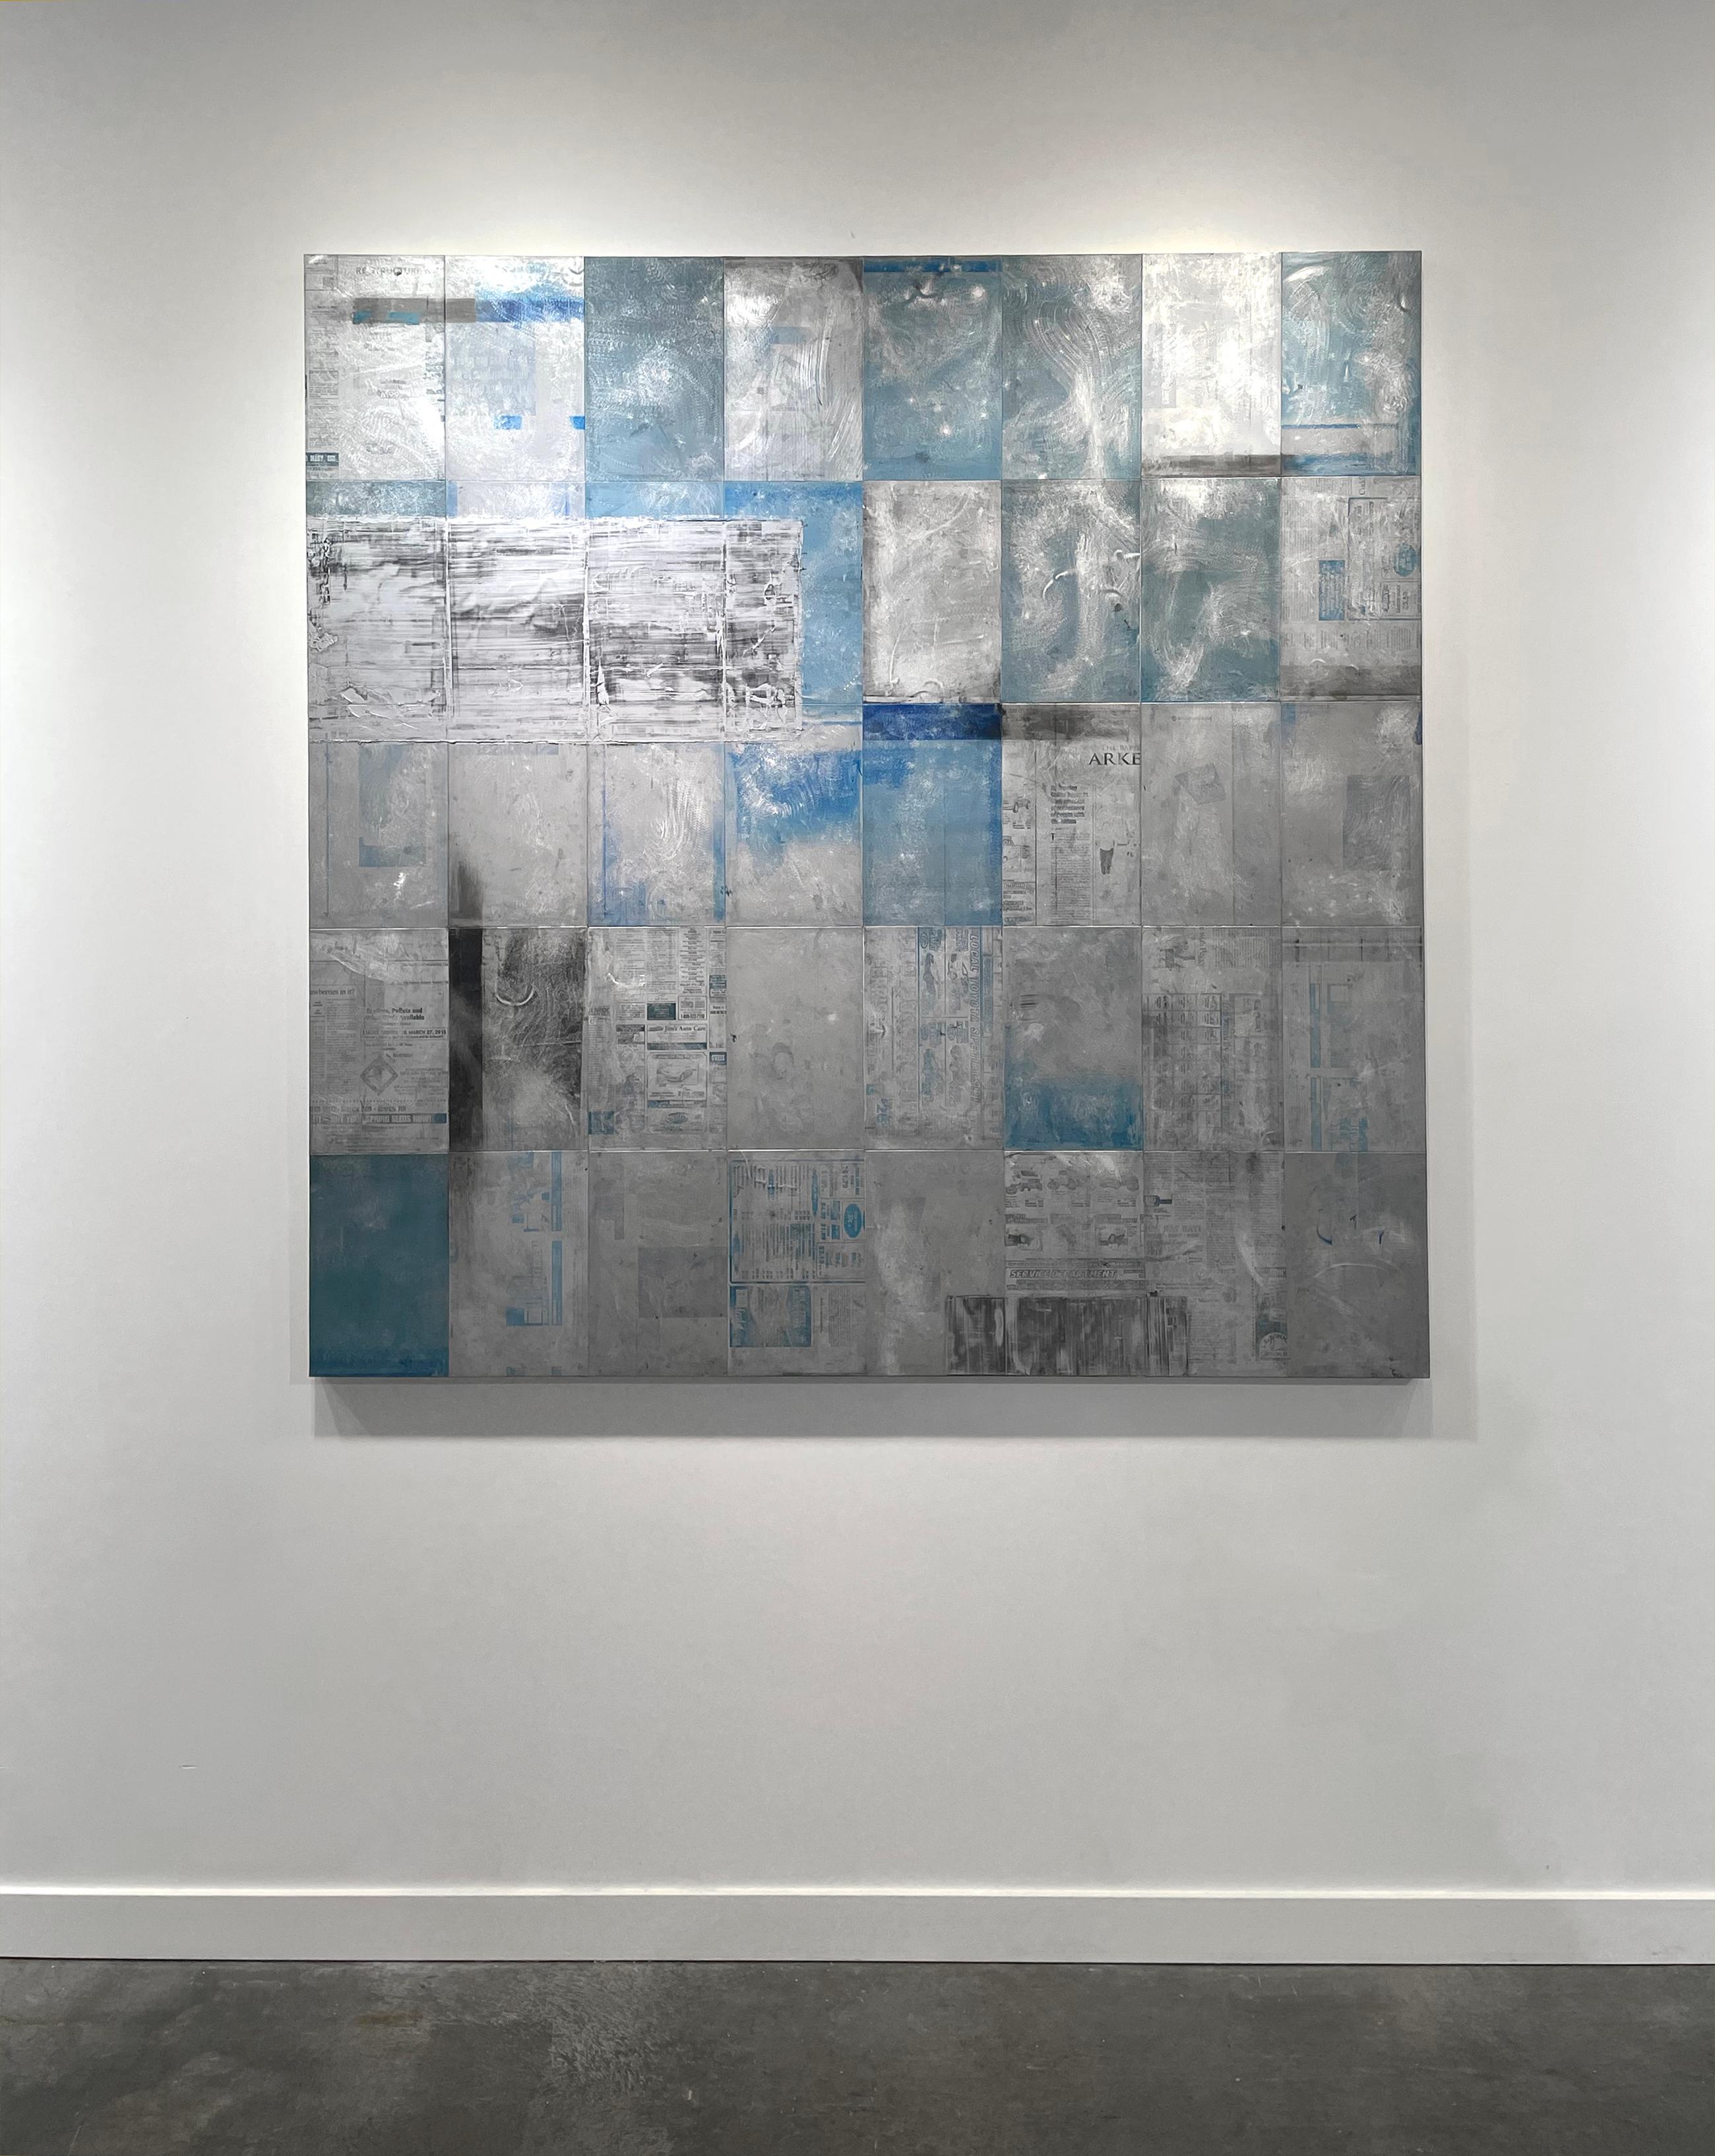 This abstract painting by Ned Martin is made with oil paint and recycled aluminum on board. It features a grid composition with a light layers of blue, black, and silver paint, with used recycled printing plates showing through. This large-scale